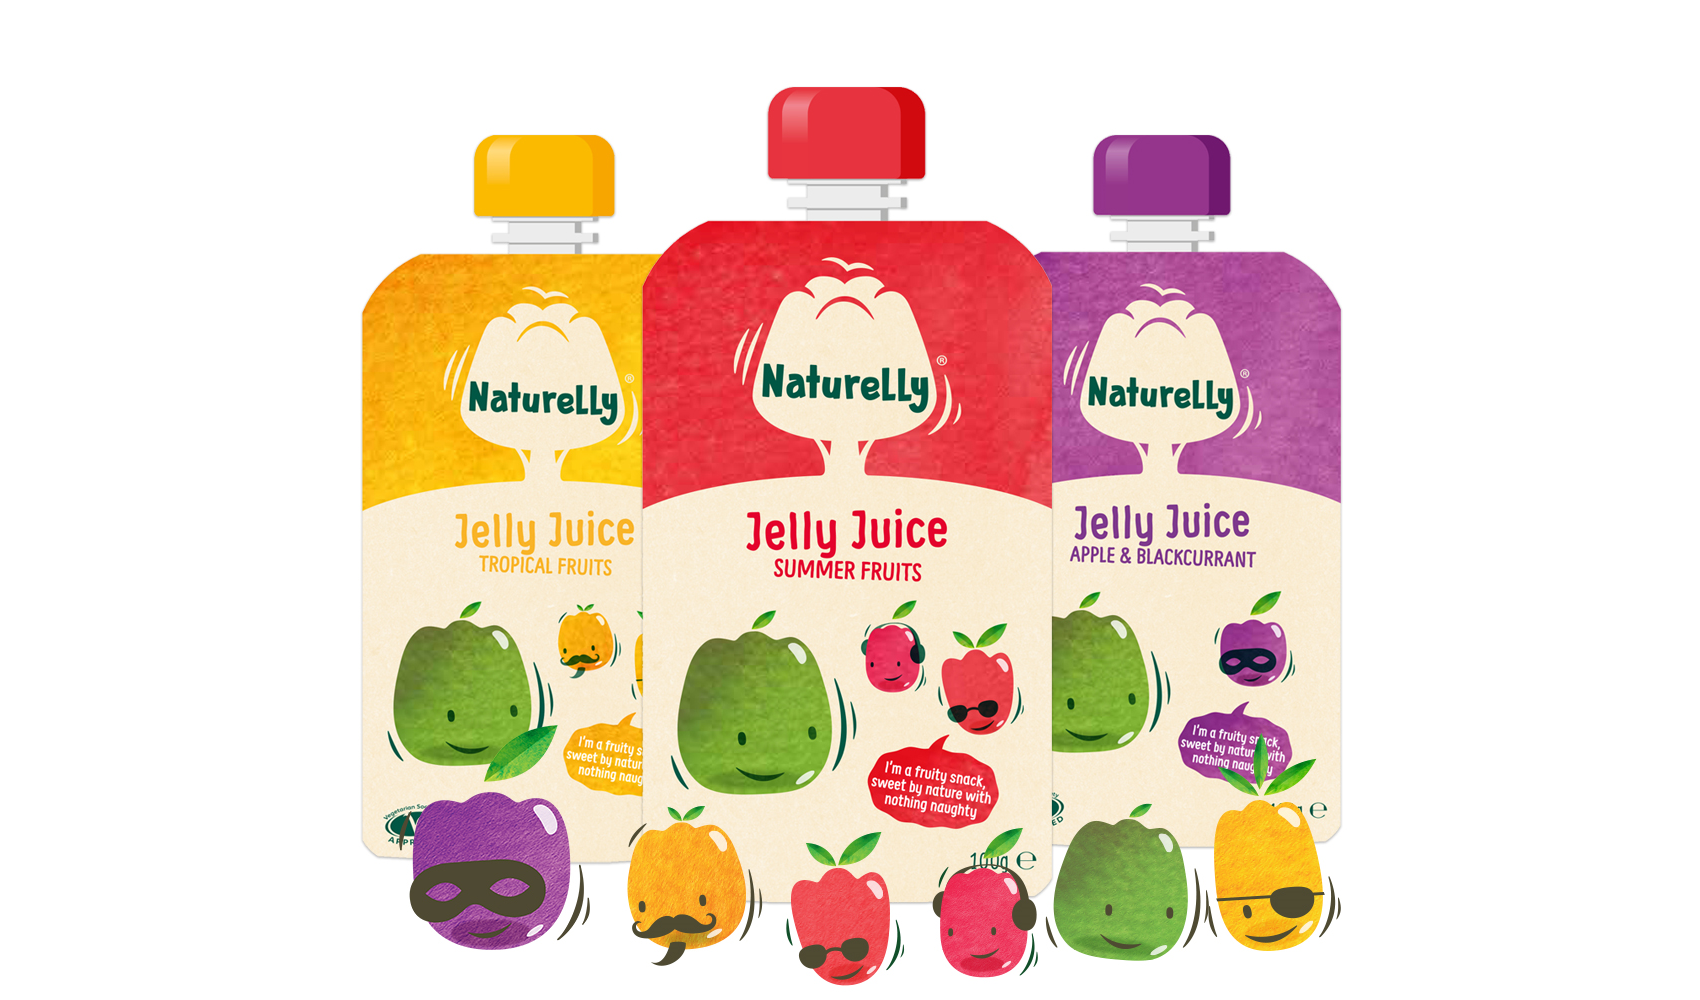 Naturelly packaging